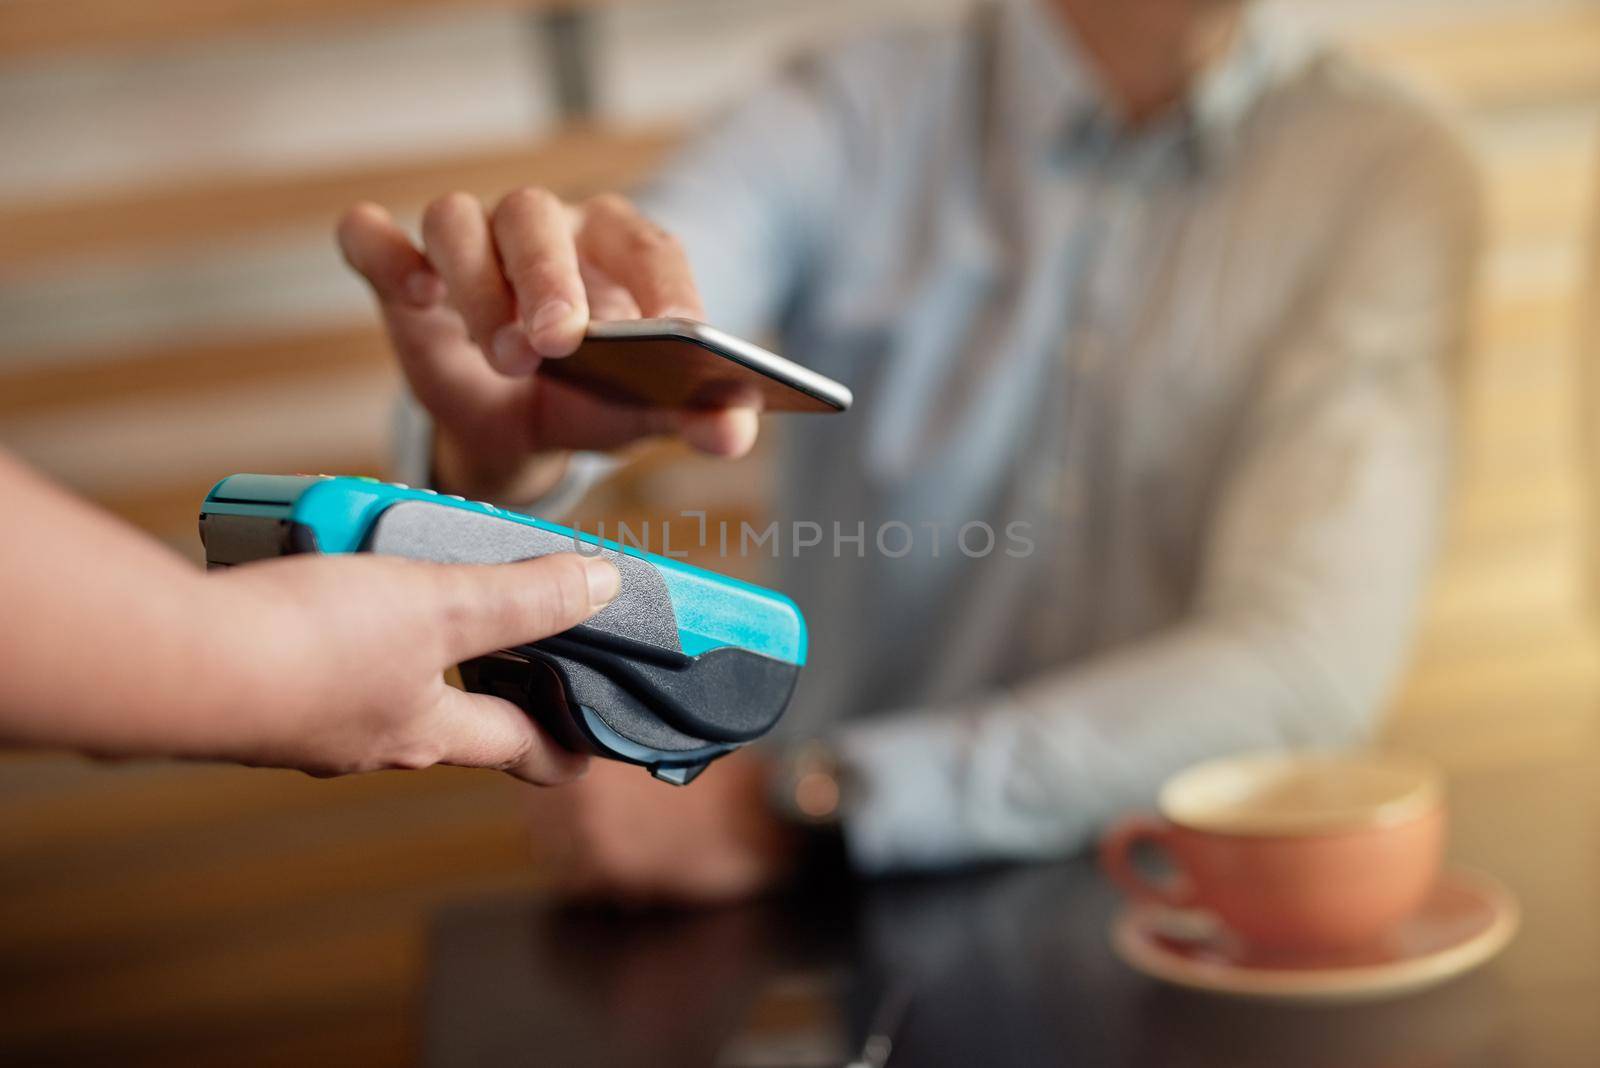 Shot of a man making a payment with his cellphone using NFC technology in a cafe.